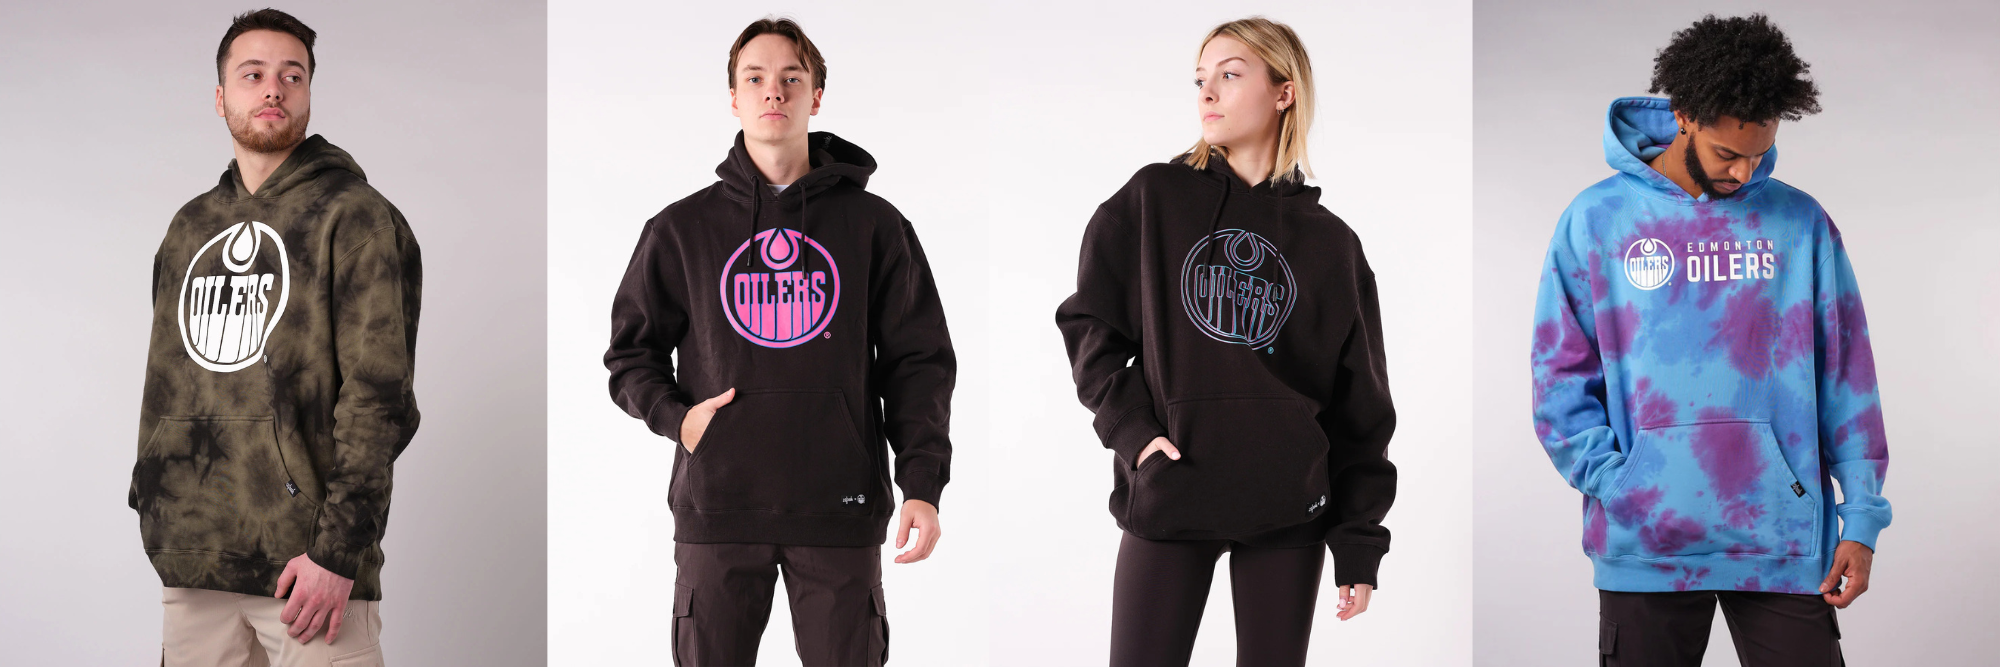 four oilers sweatshirts starting with green tie dye, two black ones with pink and blue logos, and a pink and blue tiedye one